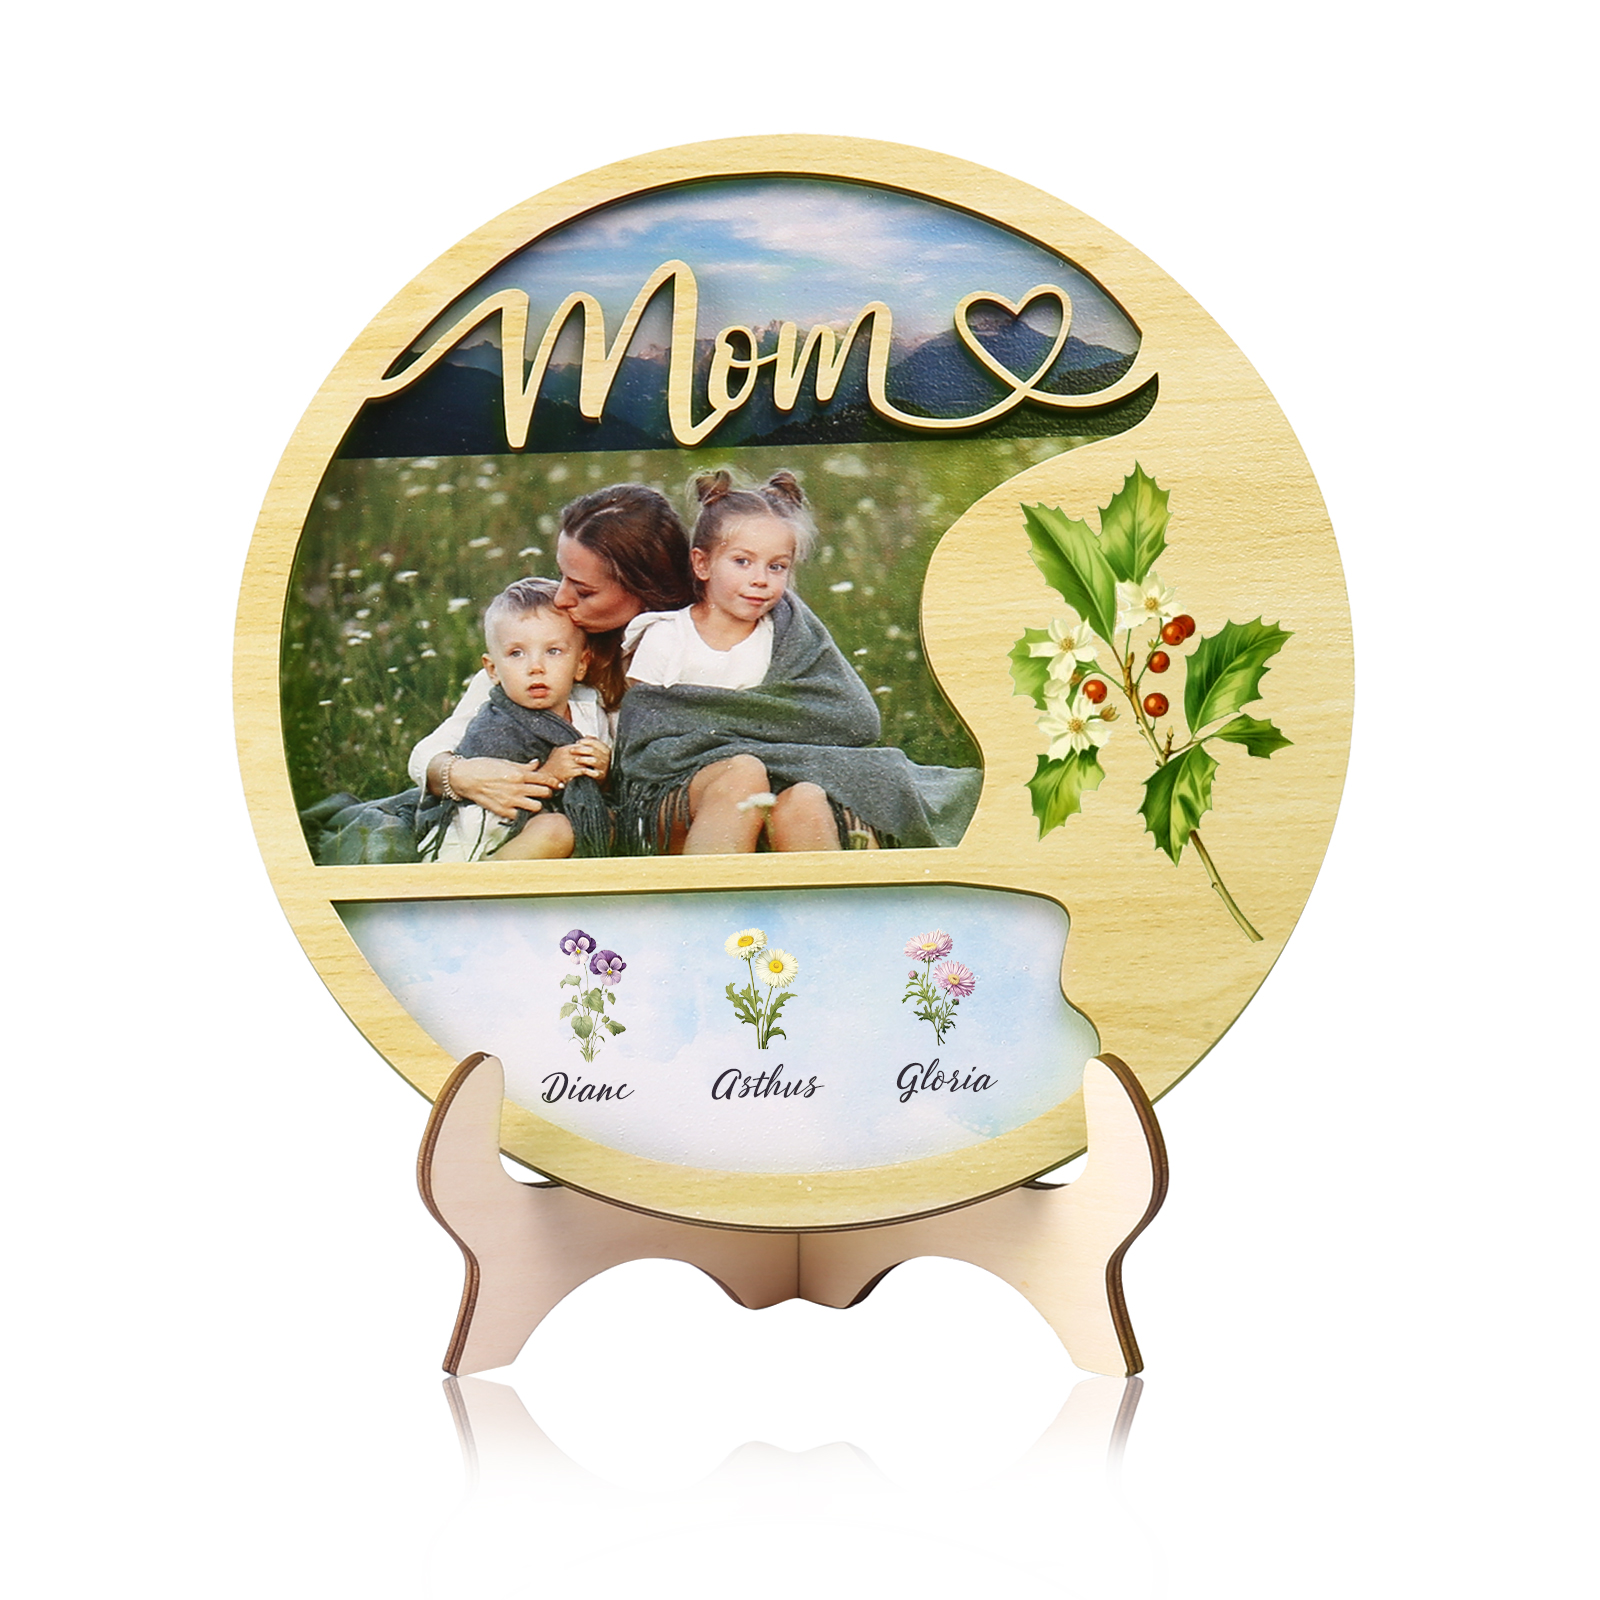 3 Names - Customized Photo Birthday Flowers and Text Wooden Ornaments for Mom/Grandma